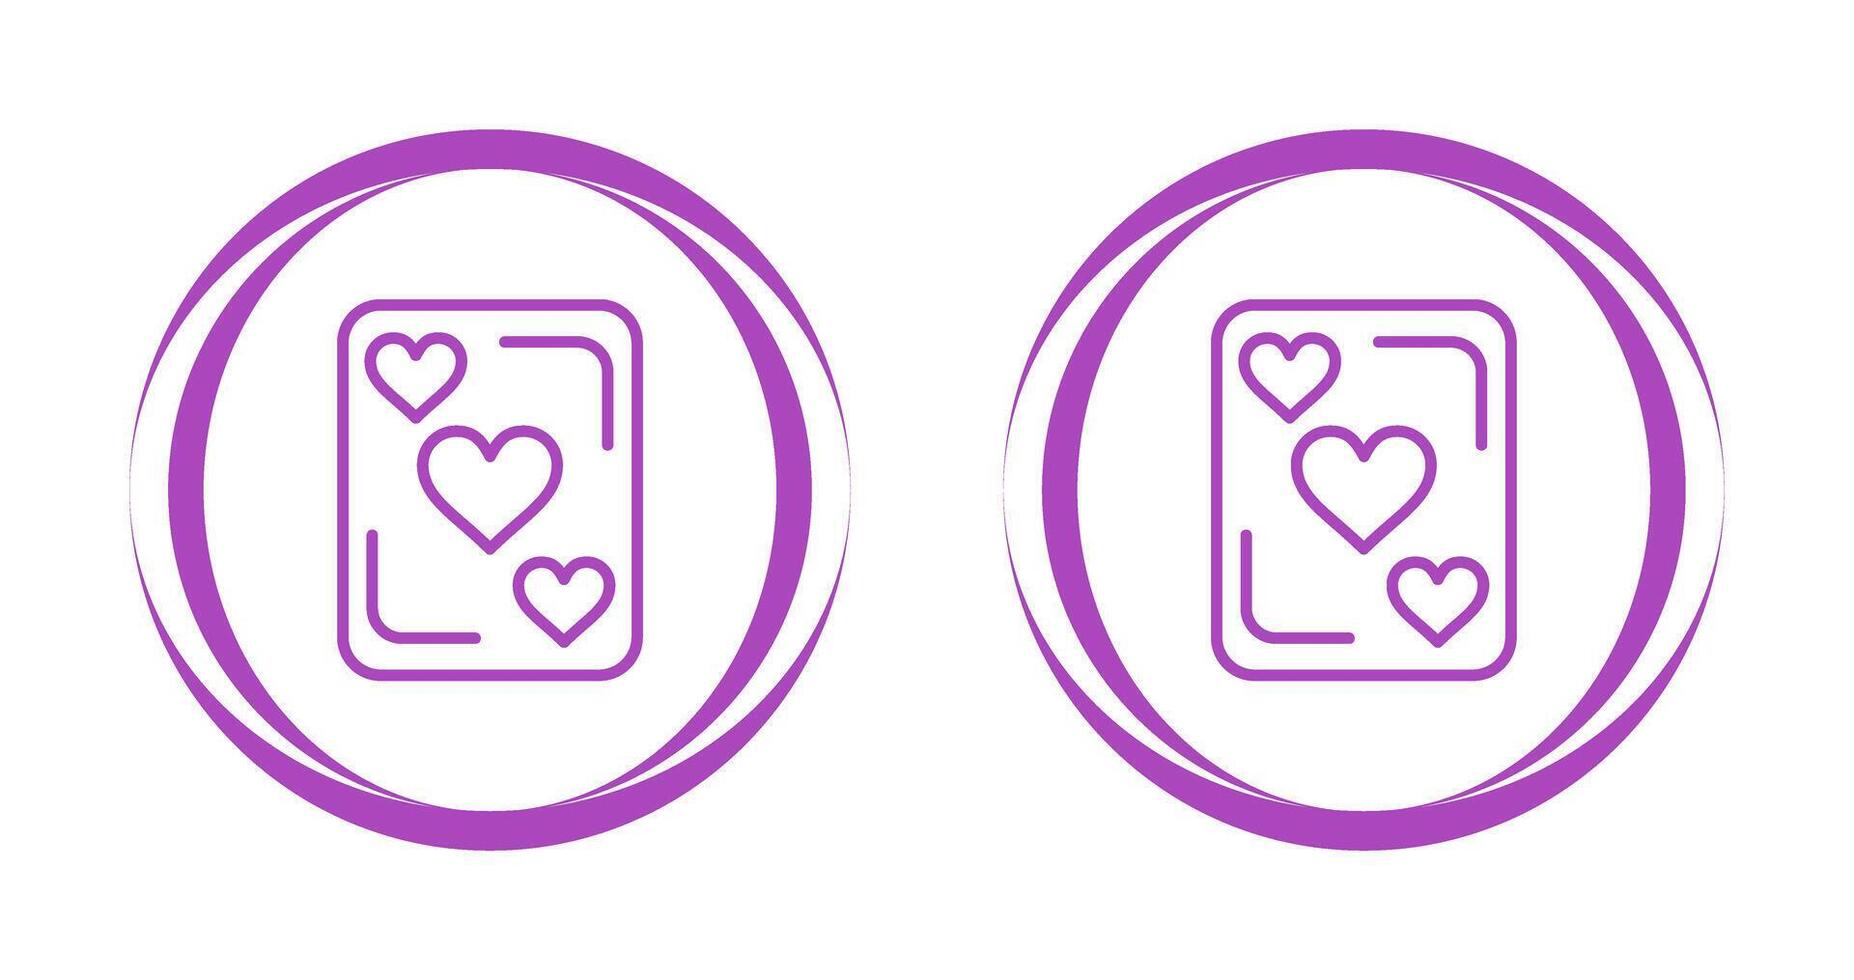 Playing card Vector Icon